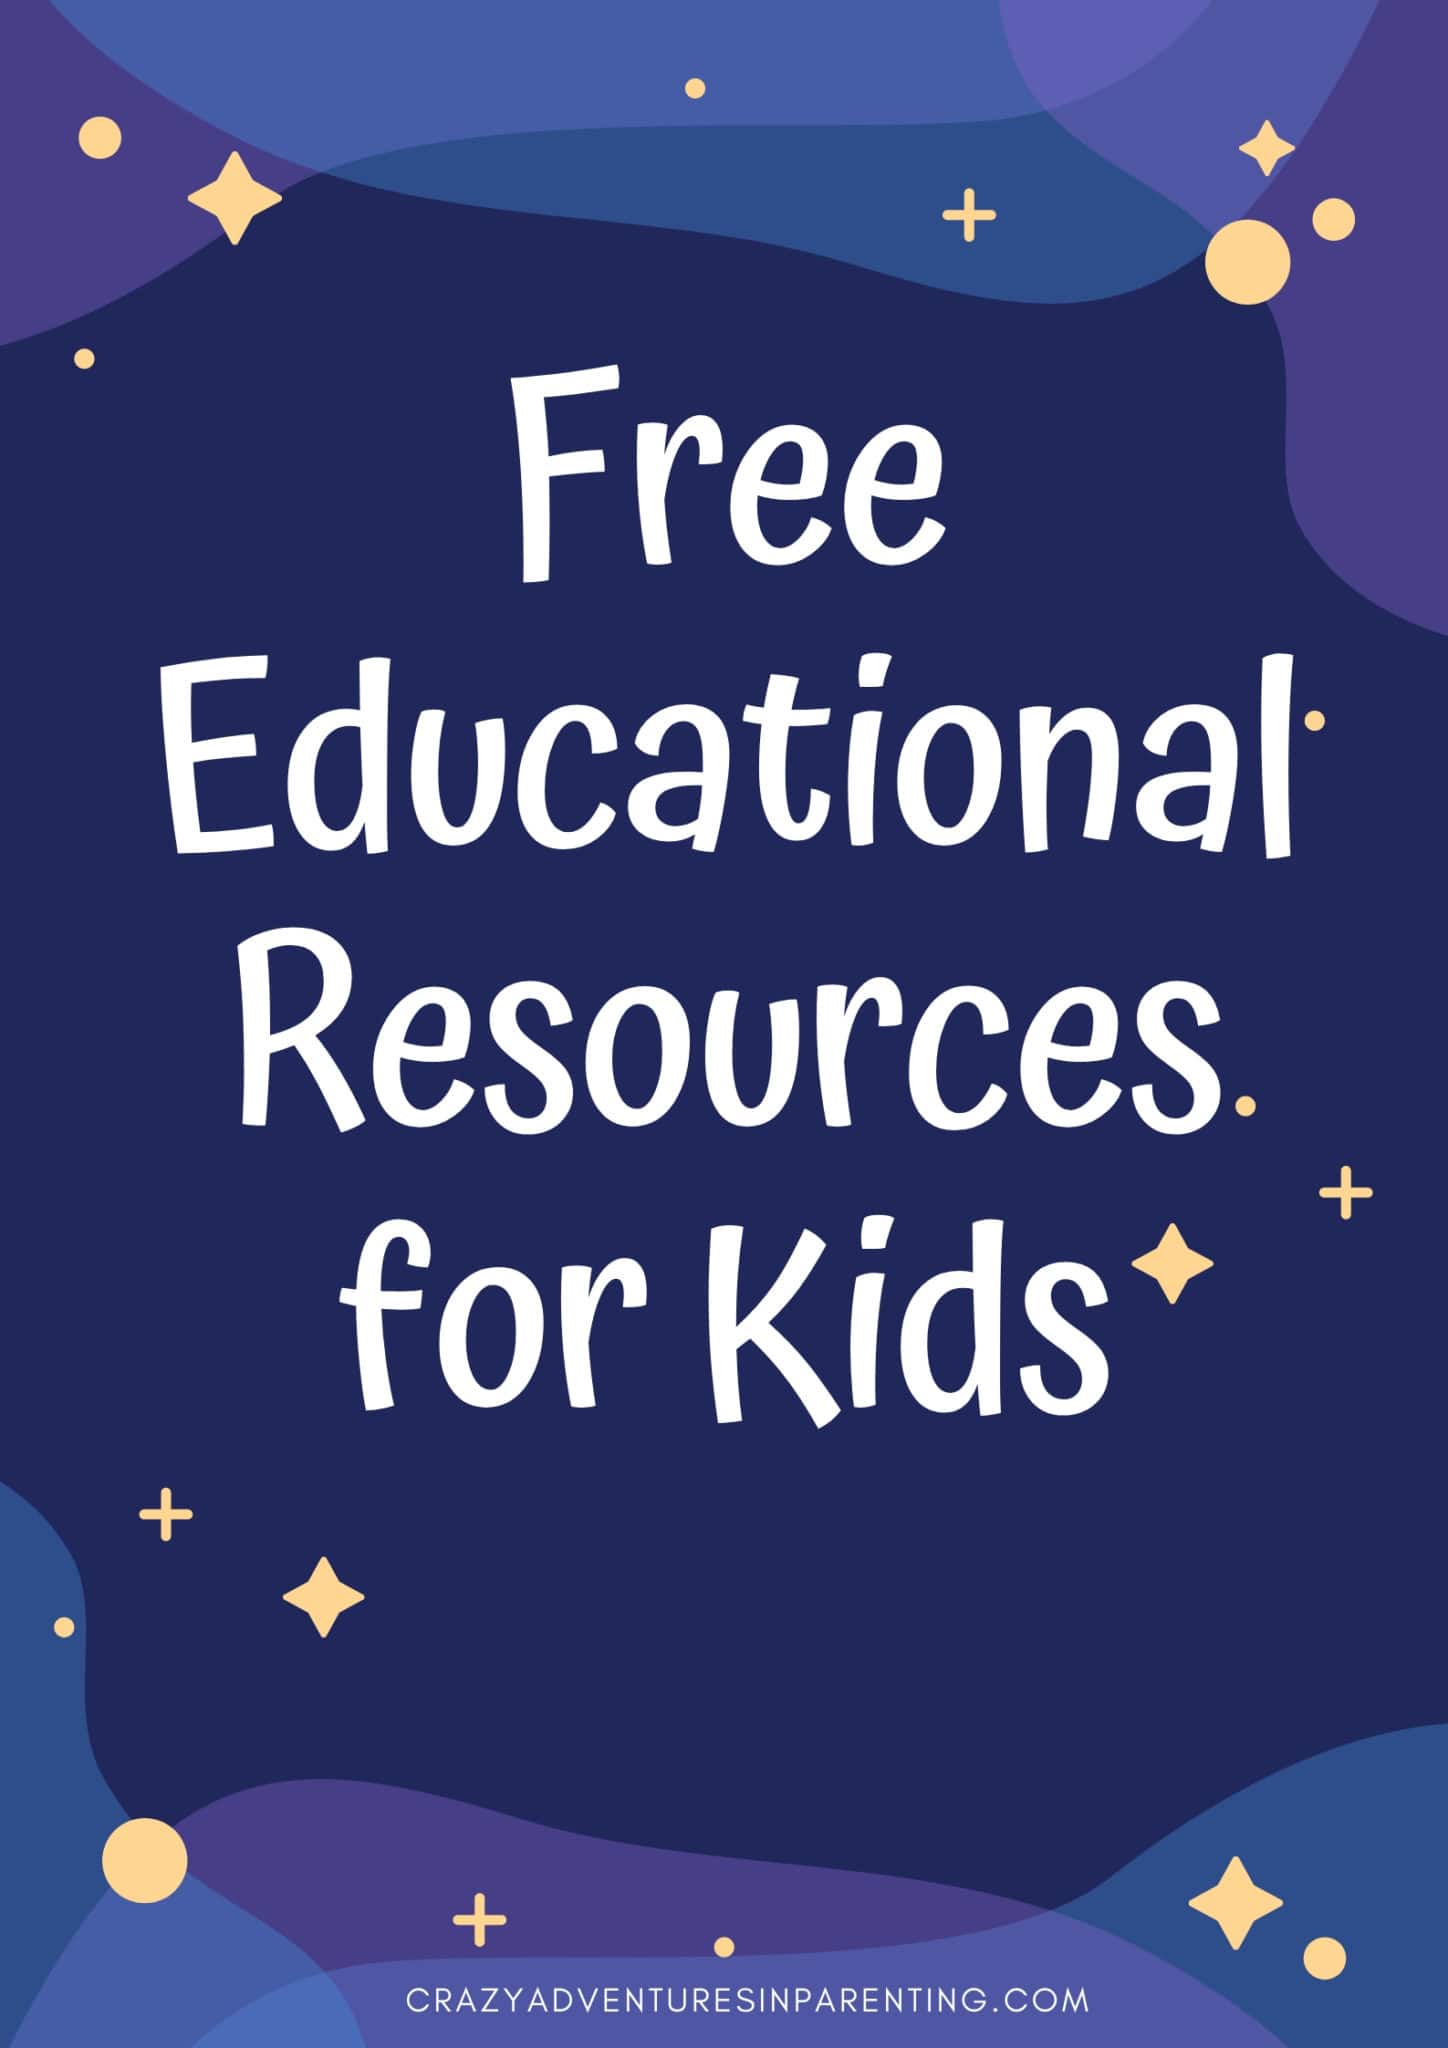 Free Education Resources for Kids